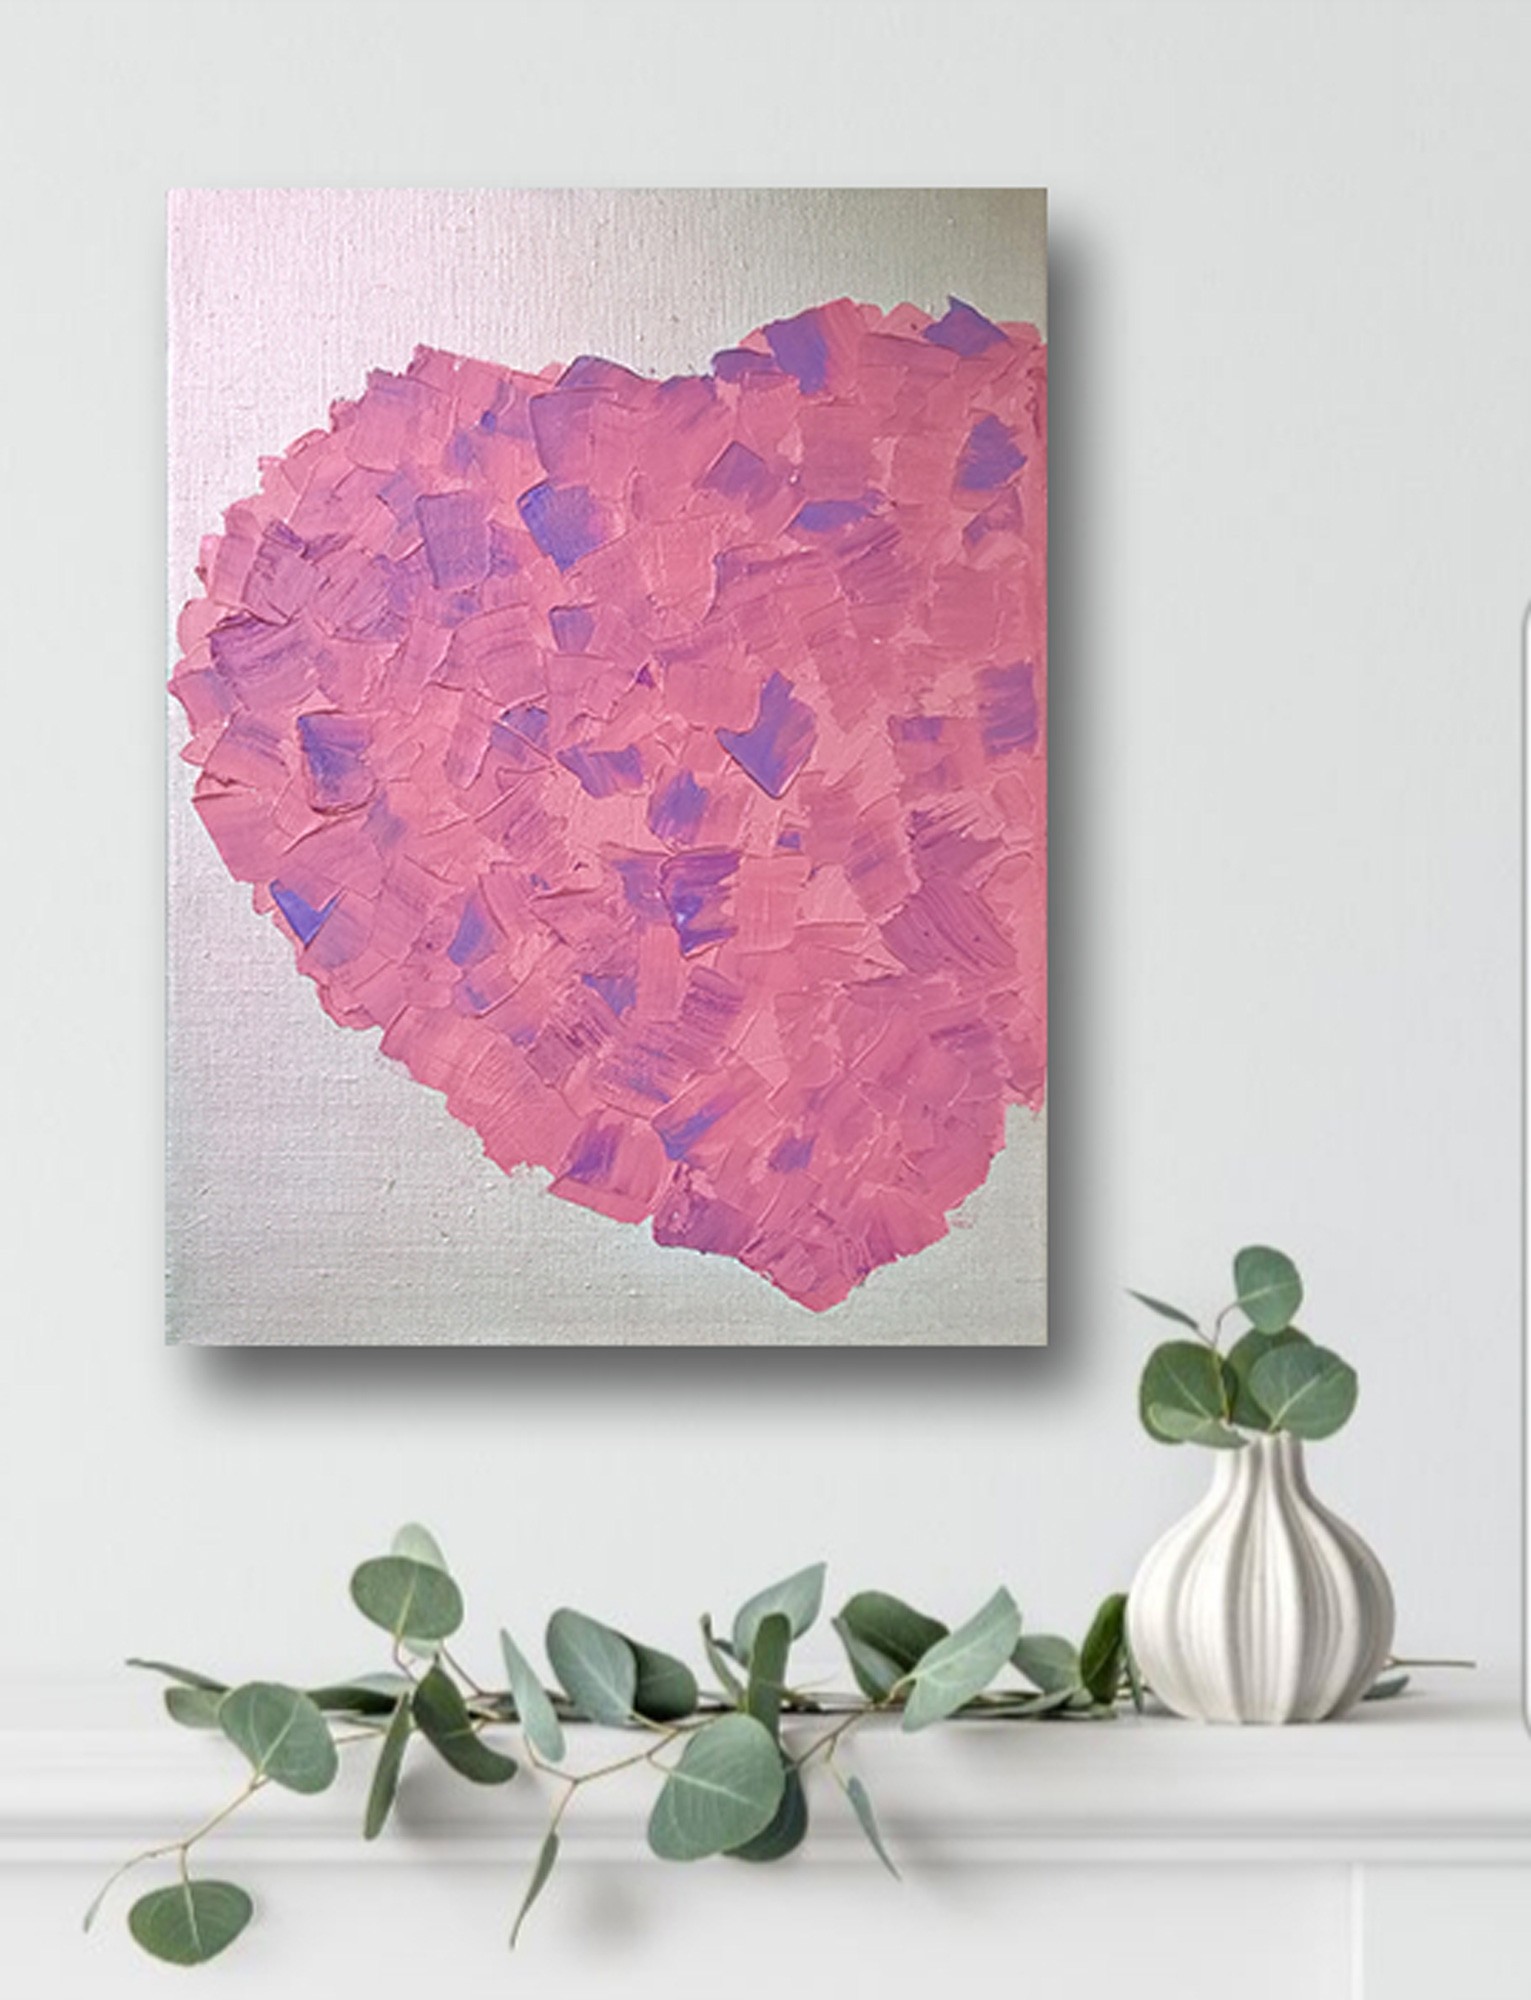 Heart oil painting original abstract wall art. Creative impasto painting